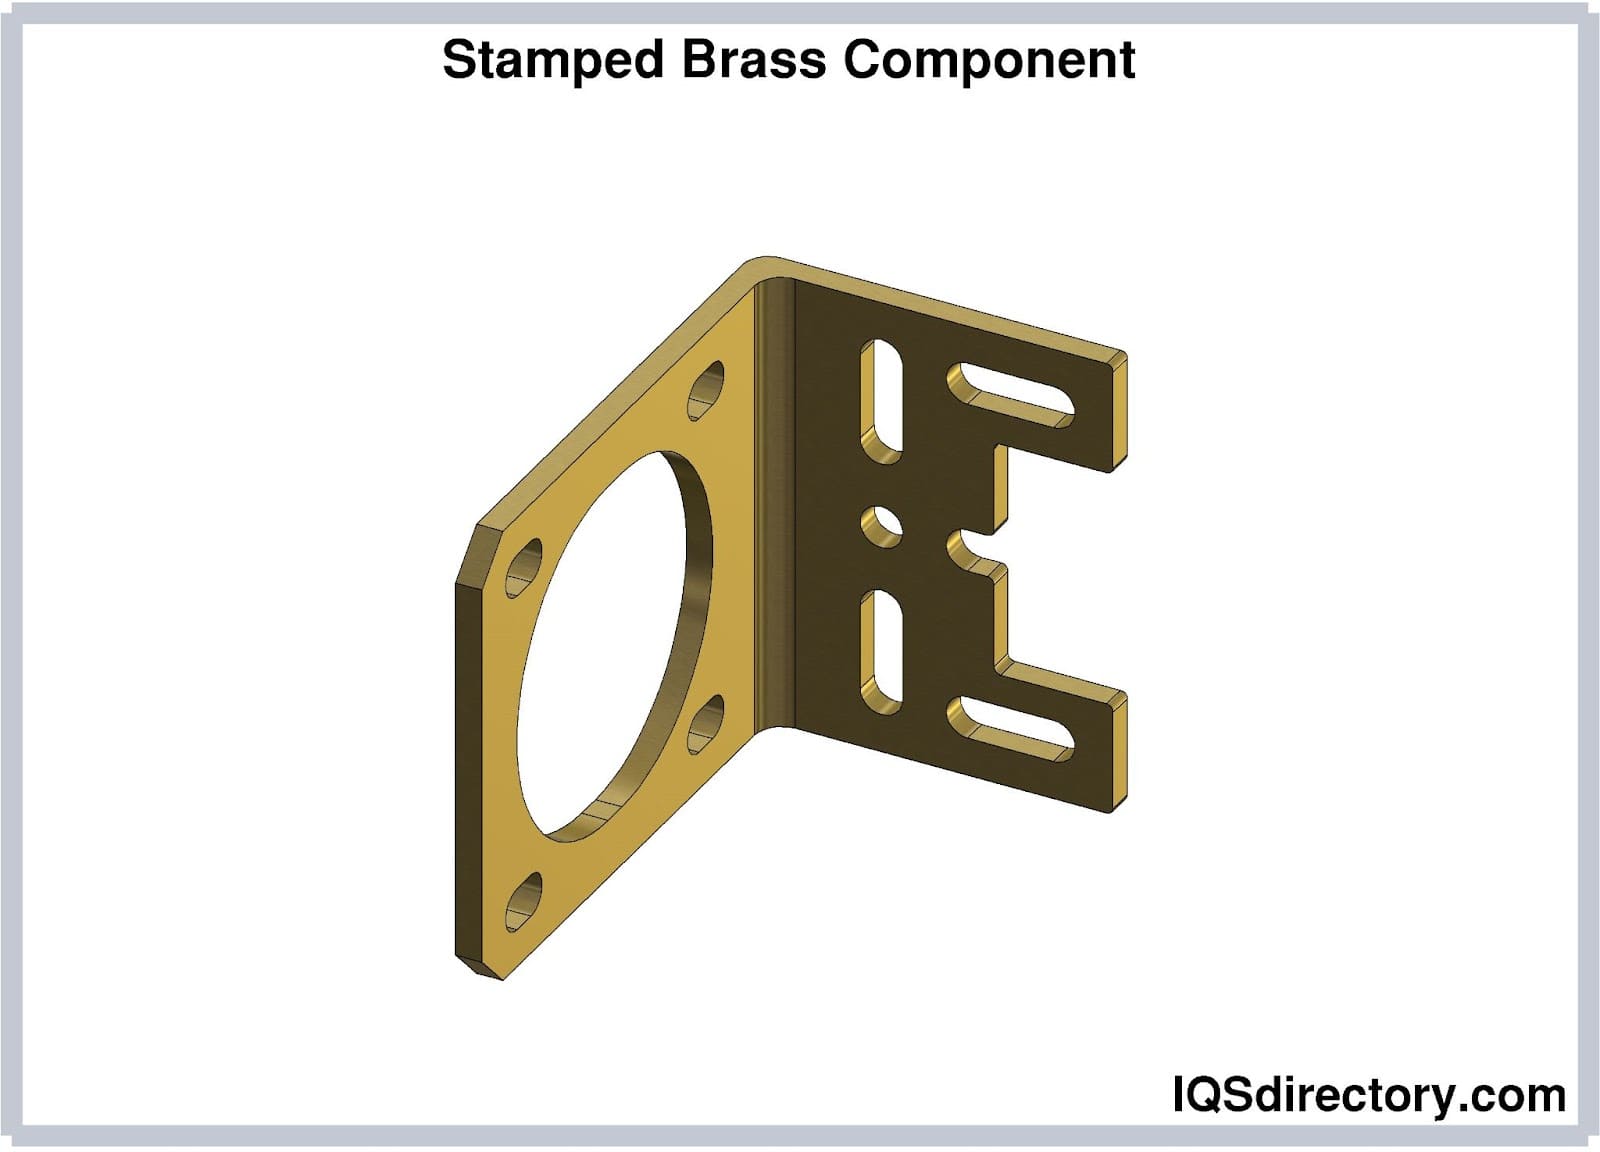 Stamped Brass Component